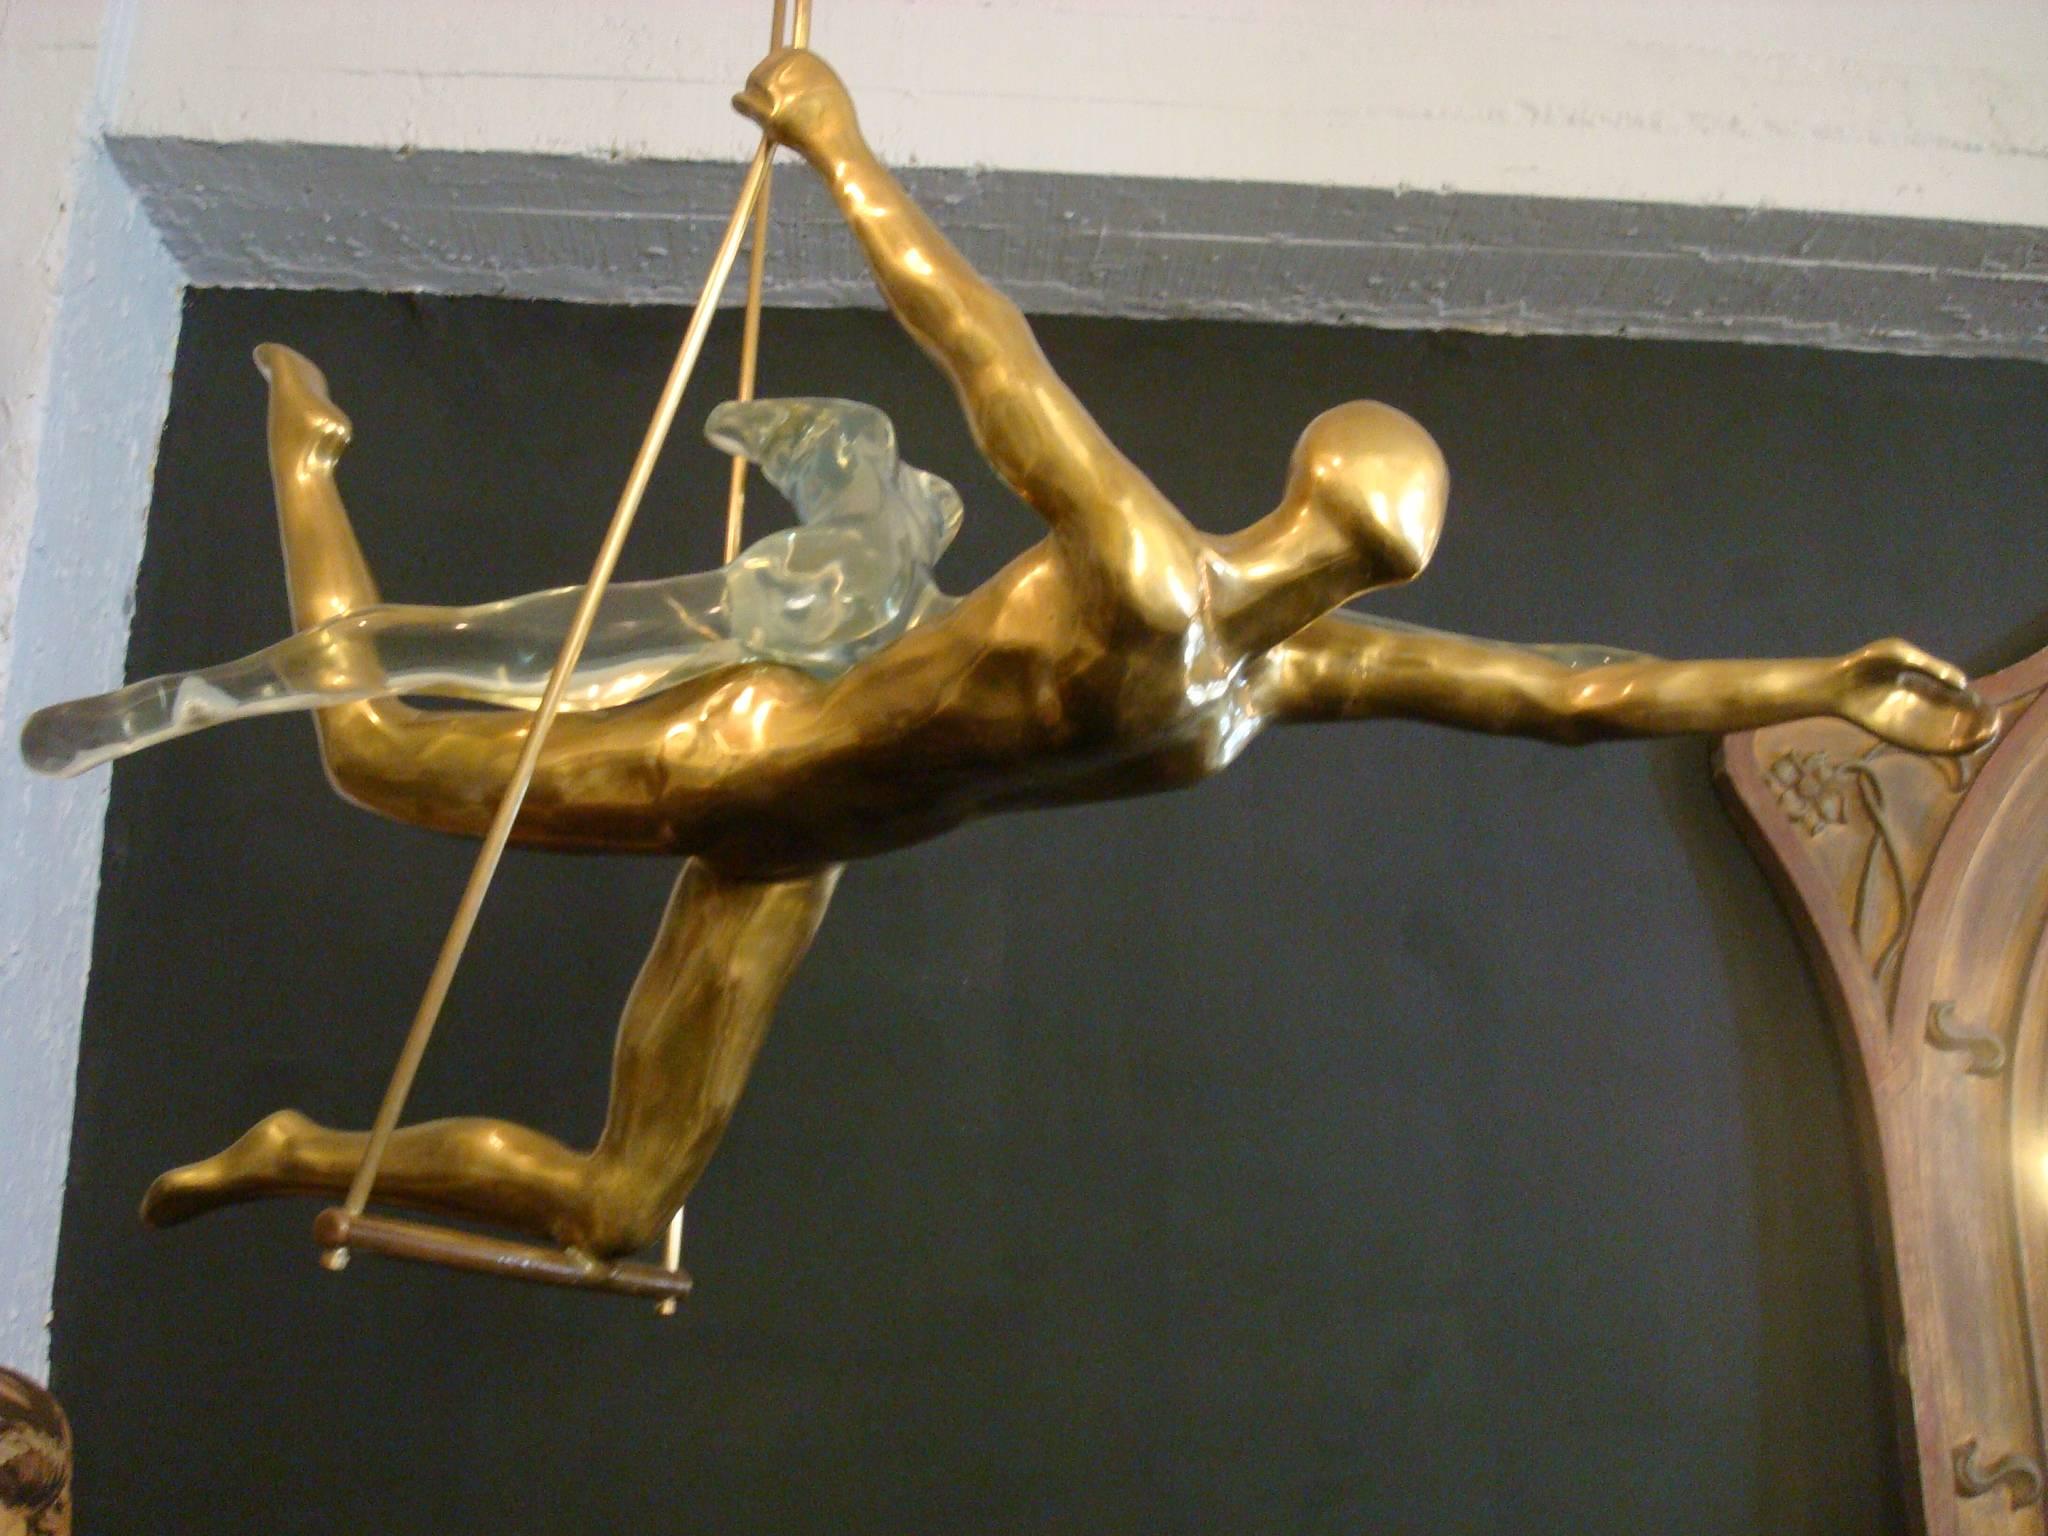 Modern Fantastic Couple on a Circus Trapeze, Sculpture by Max Forti, Italy, 1984